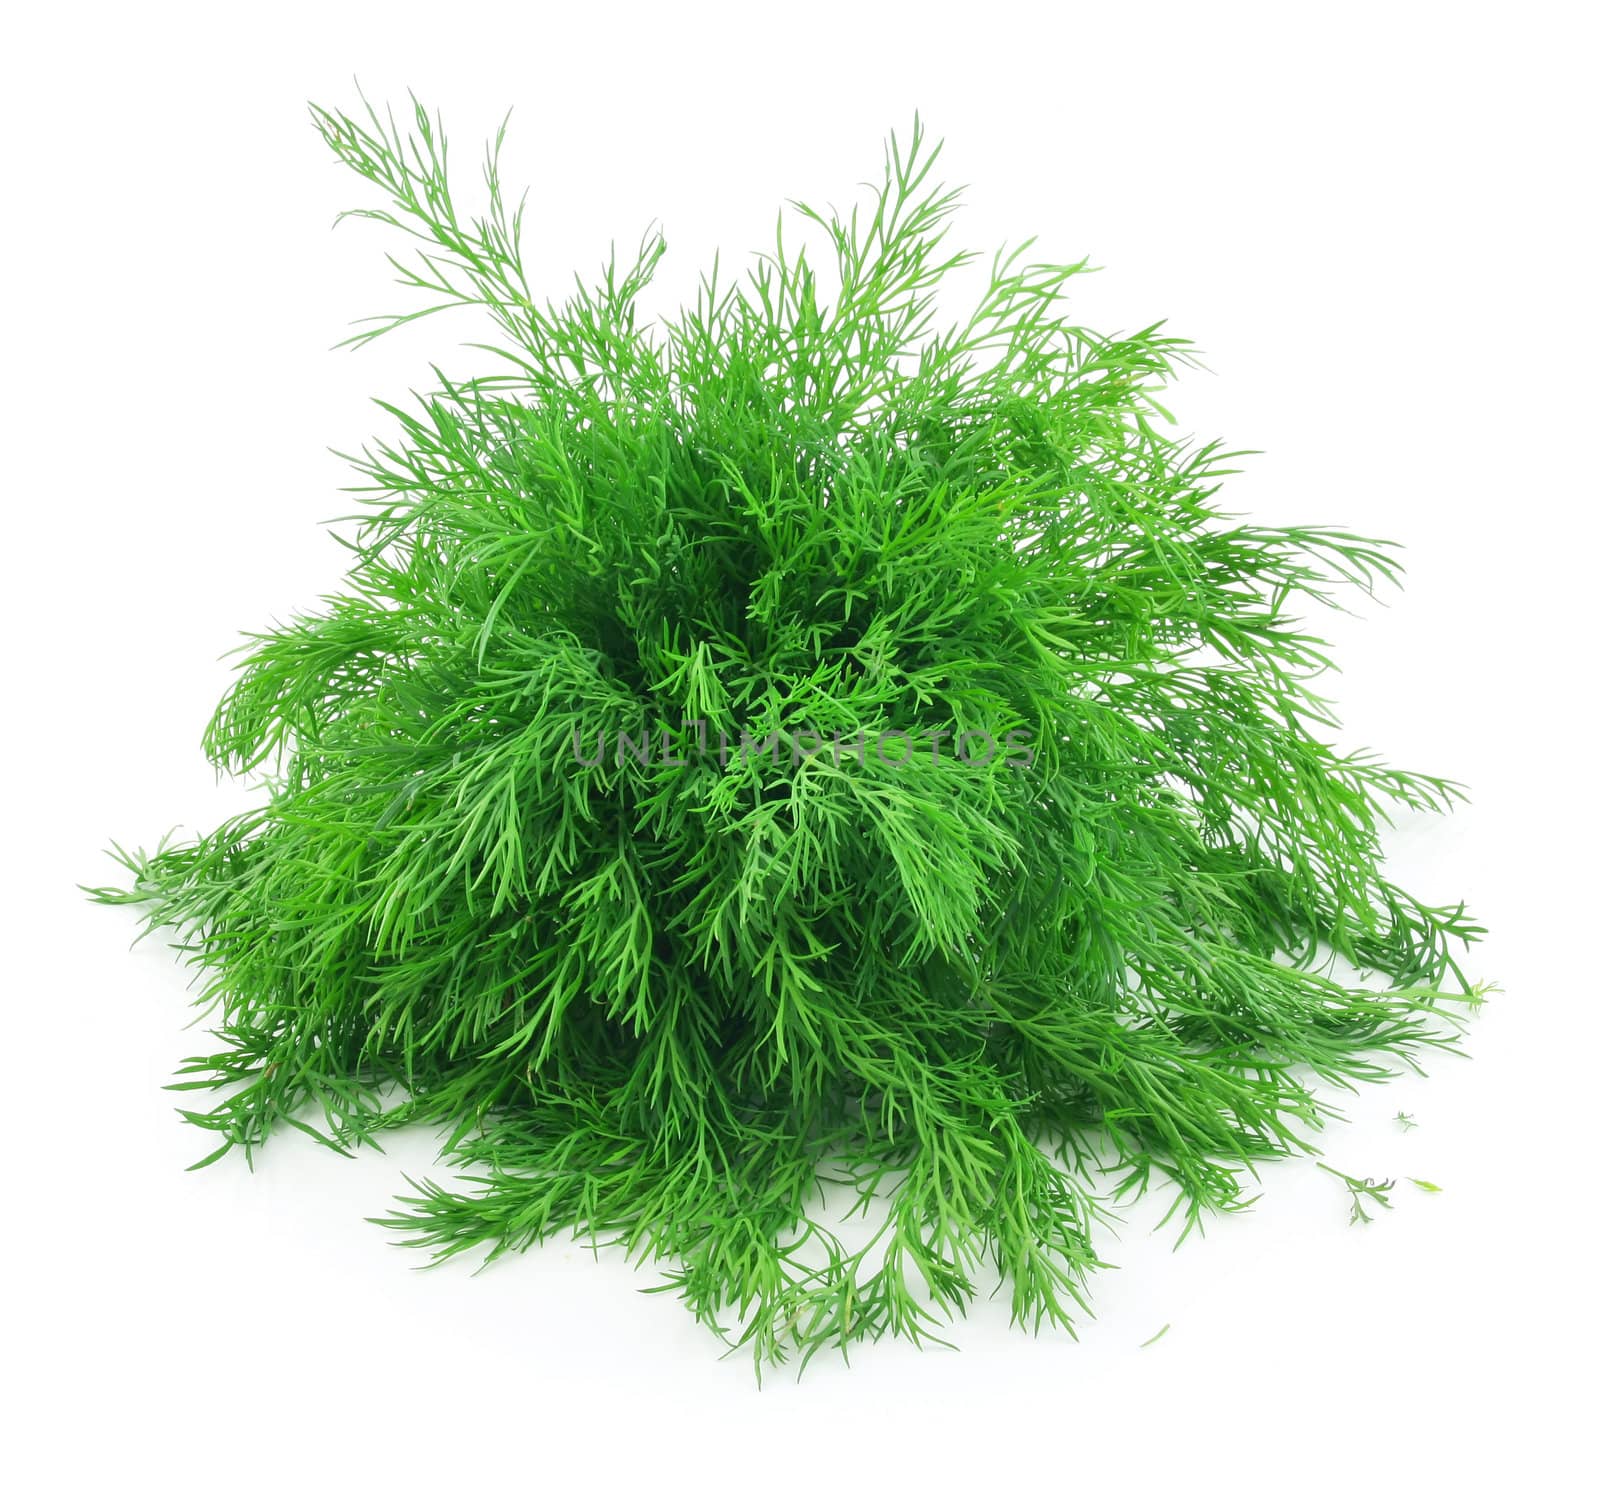 Bunch of Ripe Dill Isolated on White Background